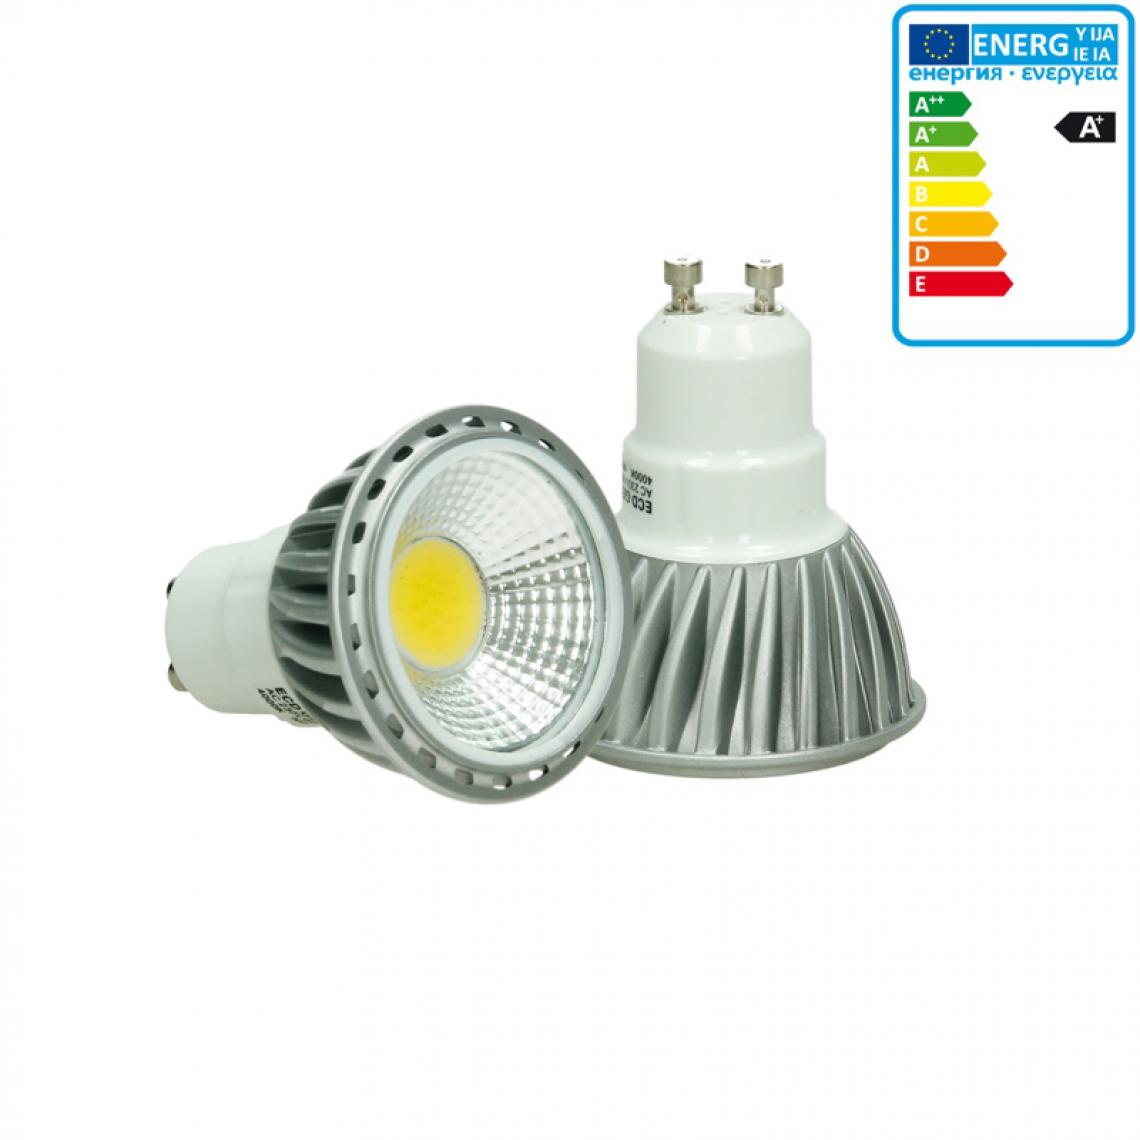 Ecd Germany - ECD Germany LED COB GU10 Spot Lampe Ampoule Blanc Froid 6W Dimmable - Ampoules LED